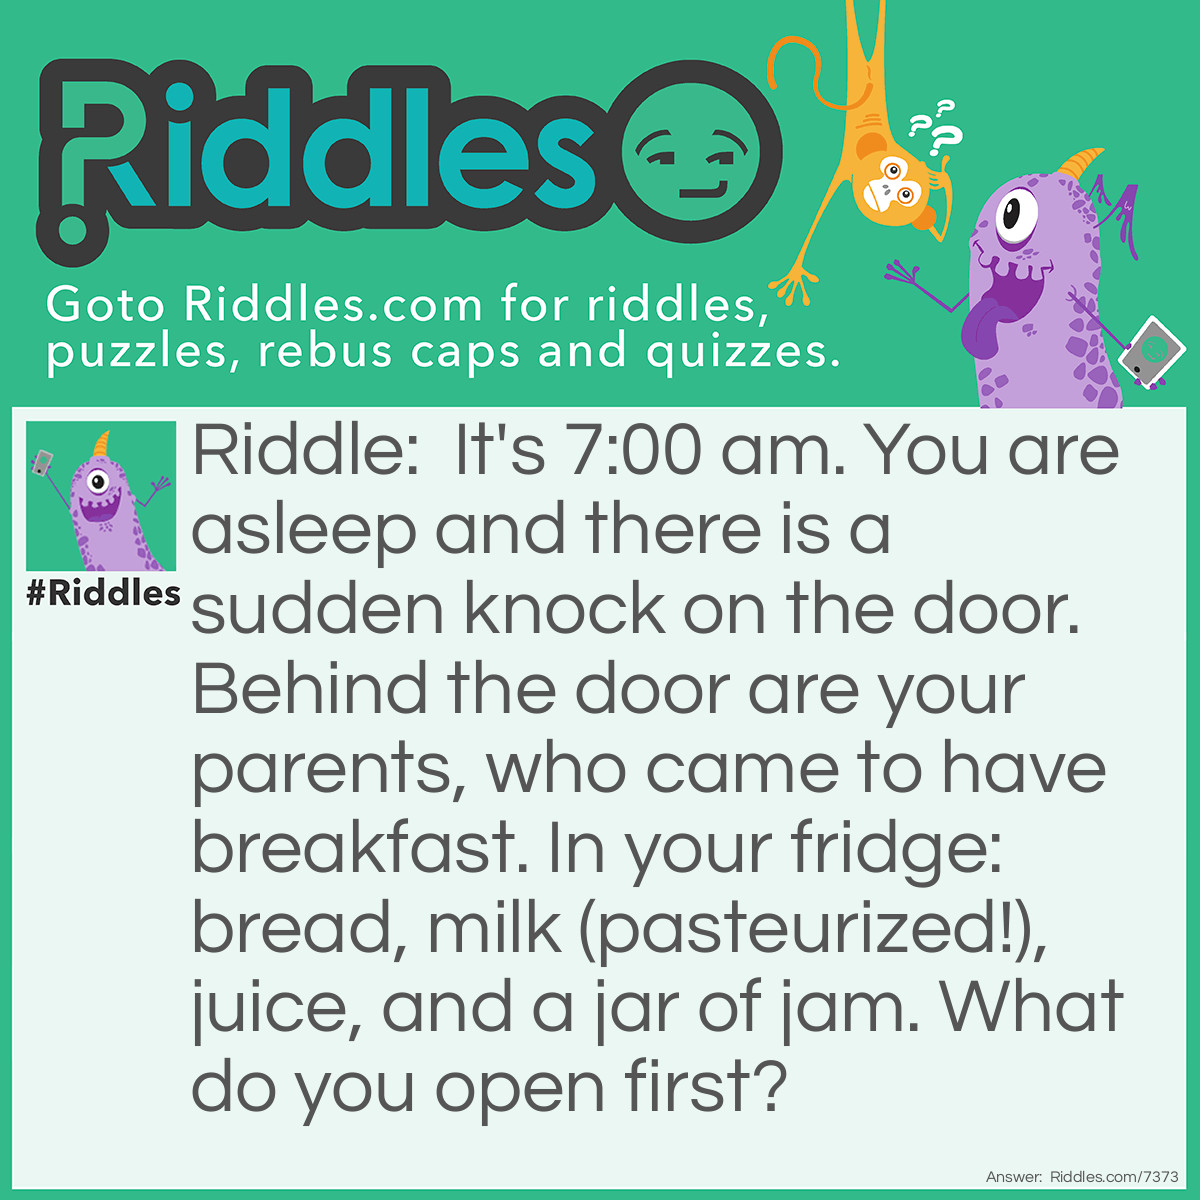 Riddle: It's 7:00 am. You are asleep and there is a sudden knock on the door. Behind the door are your parents, who came to have breakfast. In your fridge: bread, milk (pasteurized!), juice, and a jar of jam. What do you open first? Answer: Your eyes.